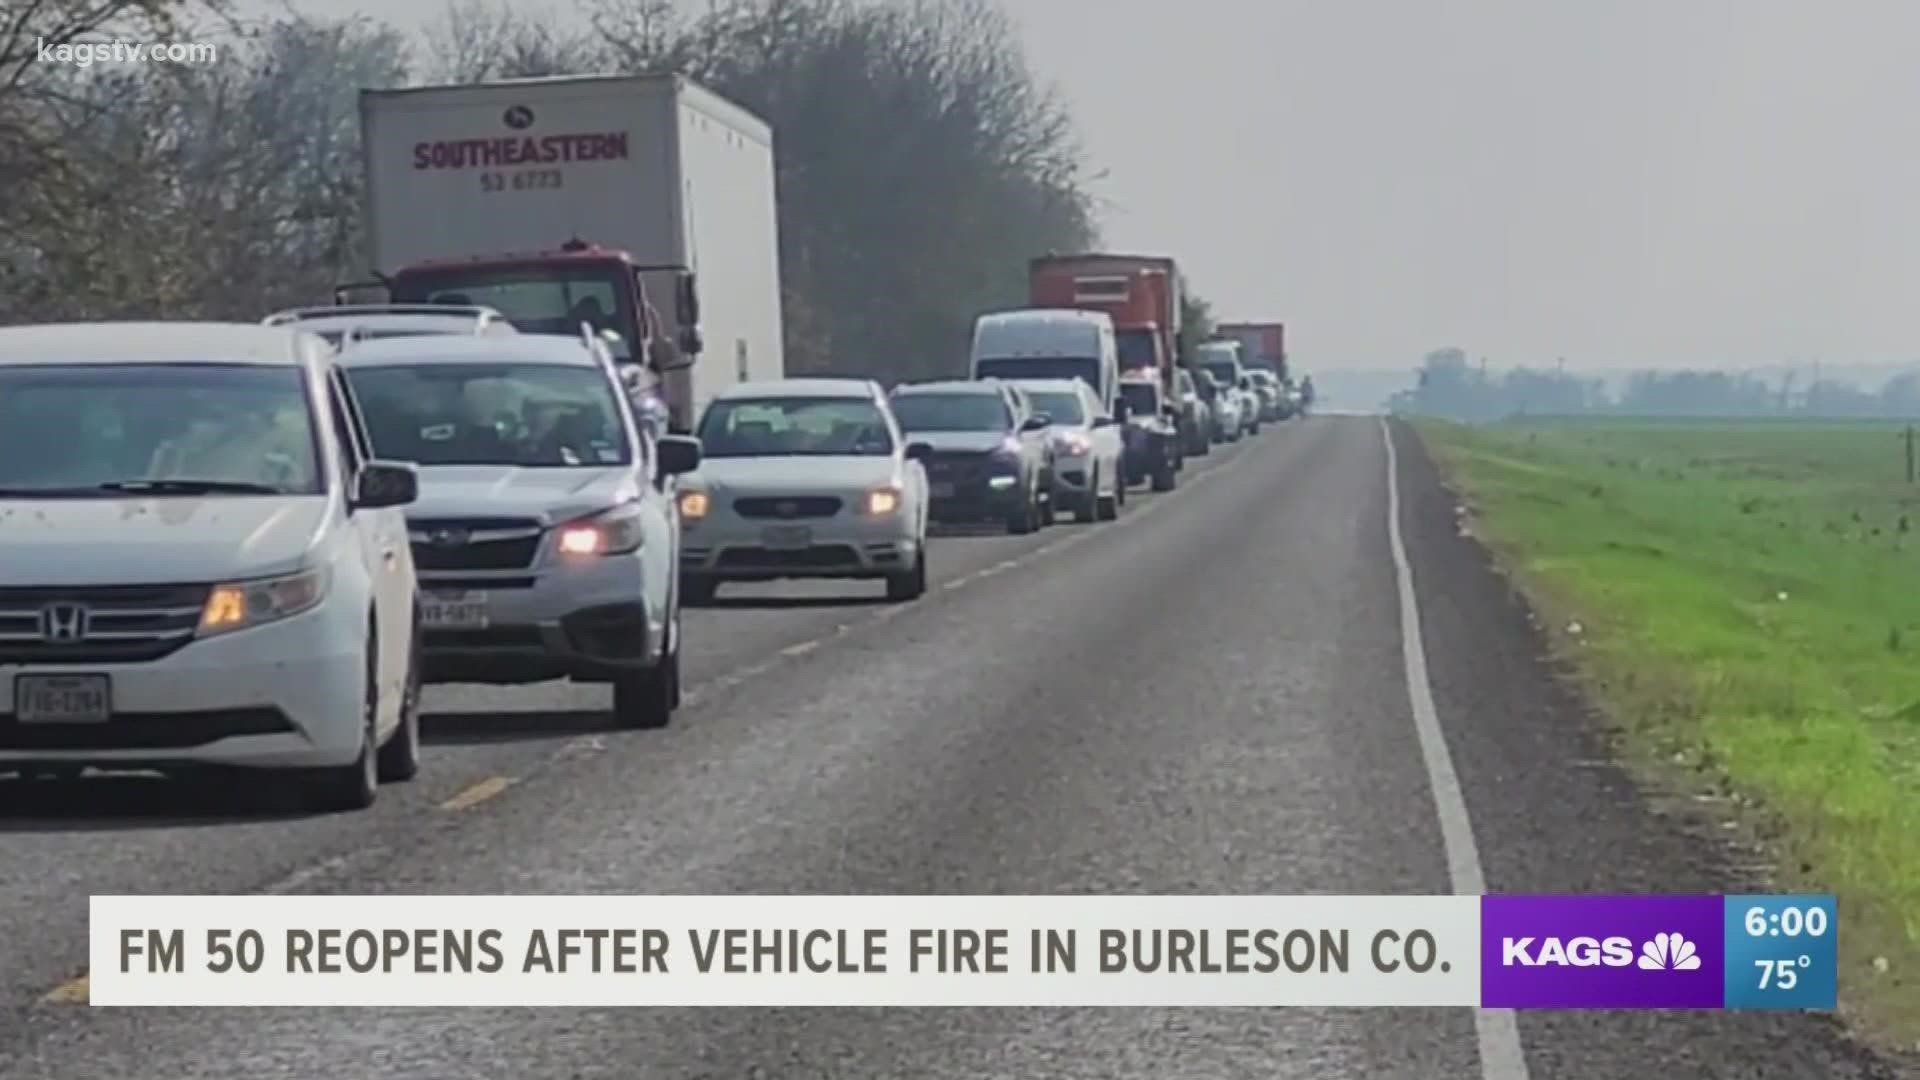 The car caught fire just before 1 p.m. Thursday on FM 50 and Co Rd 276 in Burleson county.